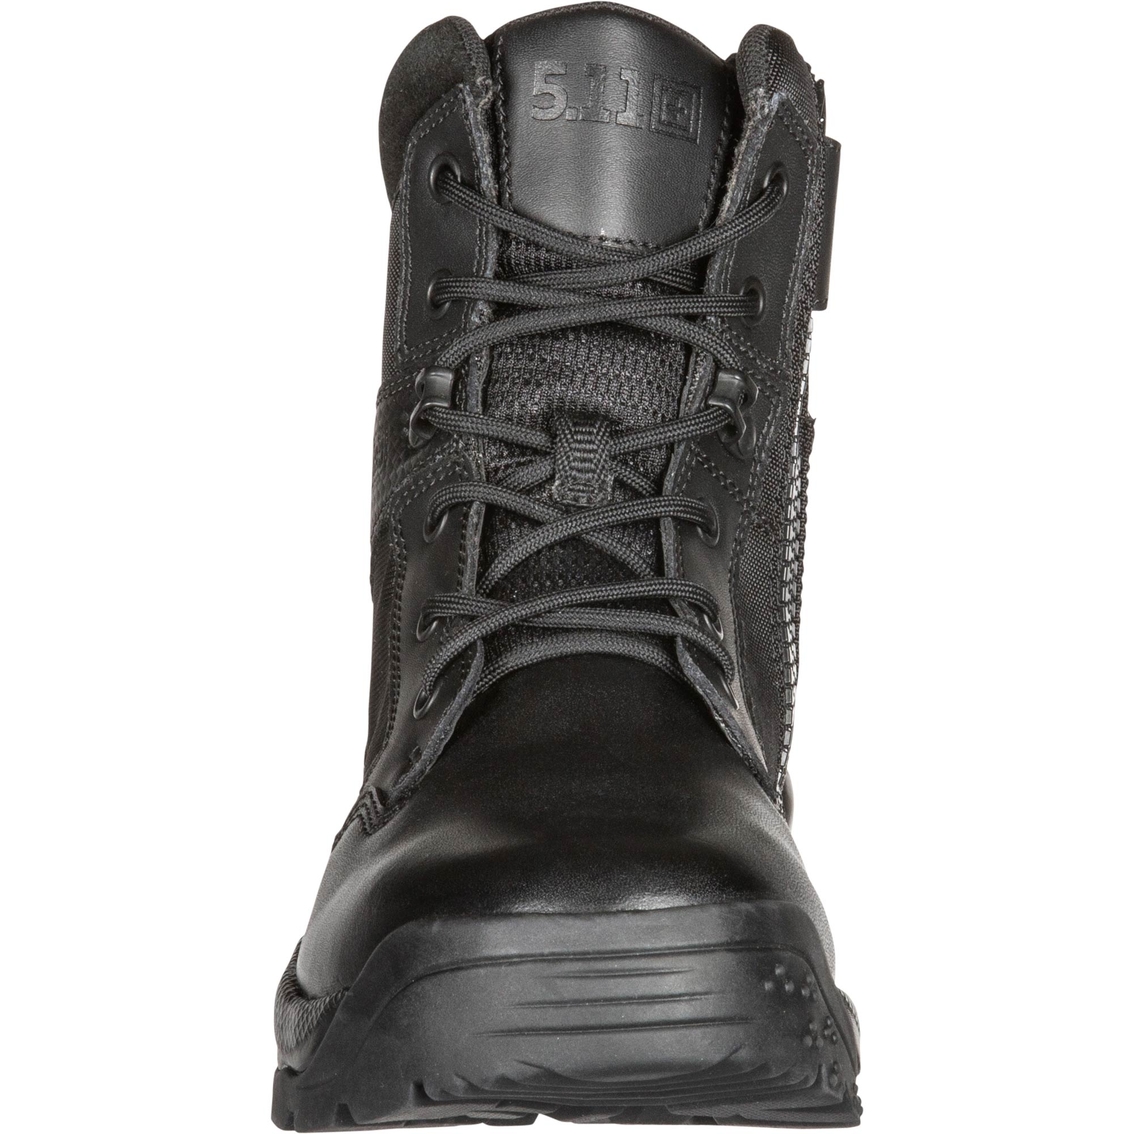 5.11 Men's A.T.A.C. 2.0 6 in. SZ Boots - Image 4 of 5